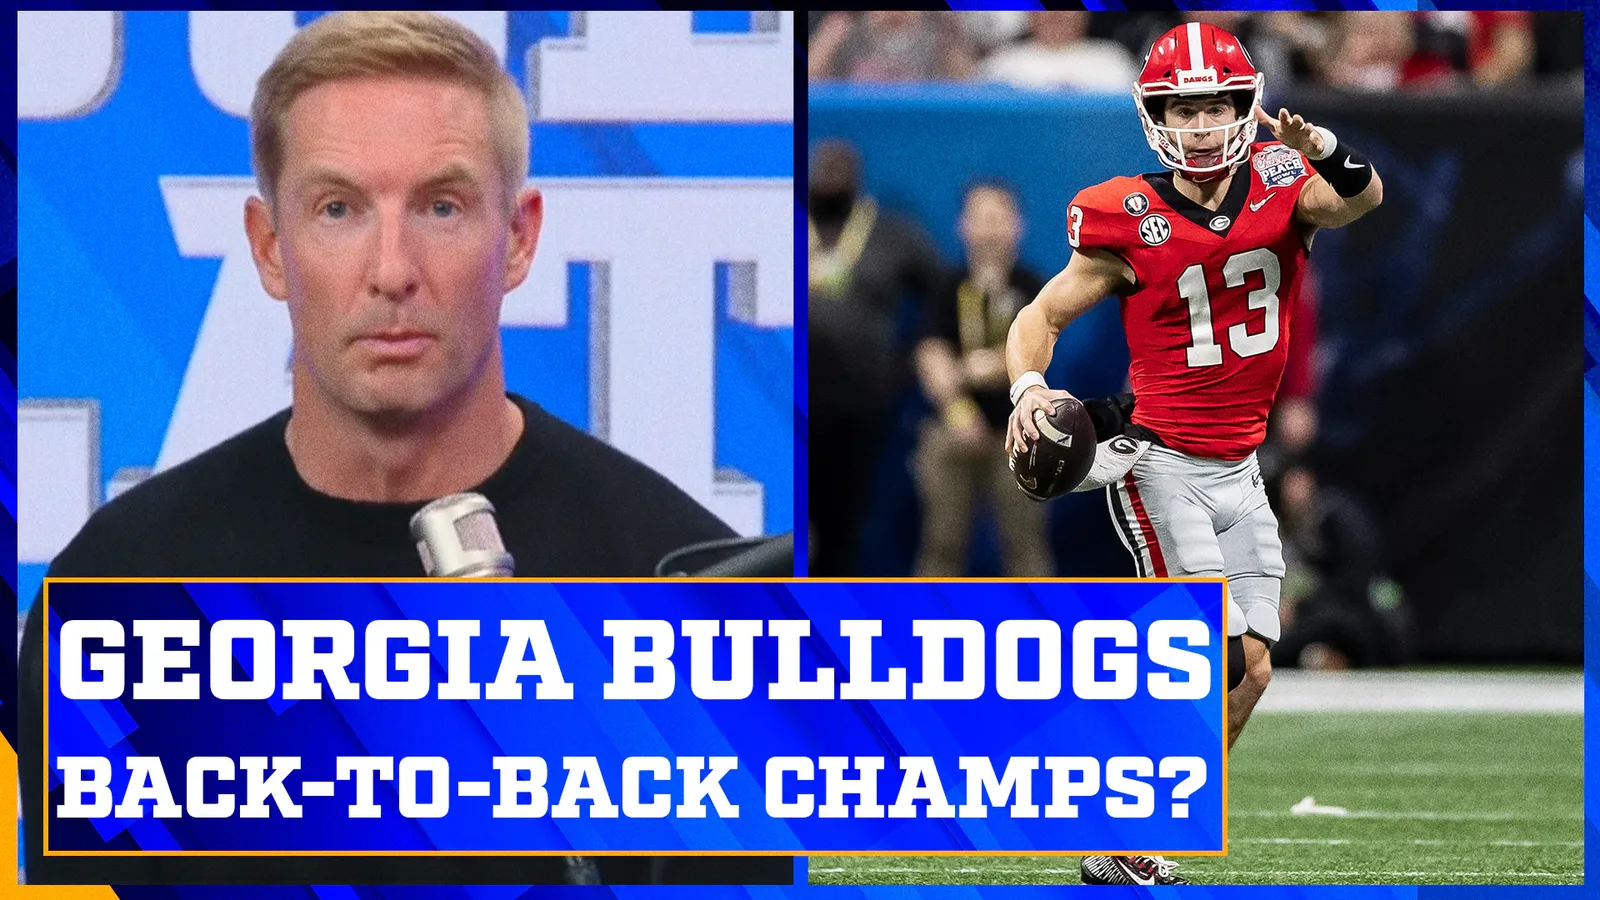 Can Georgia be back-to-back National Champions?